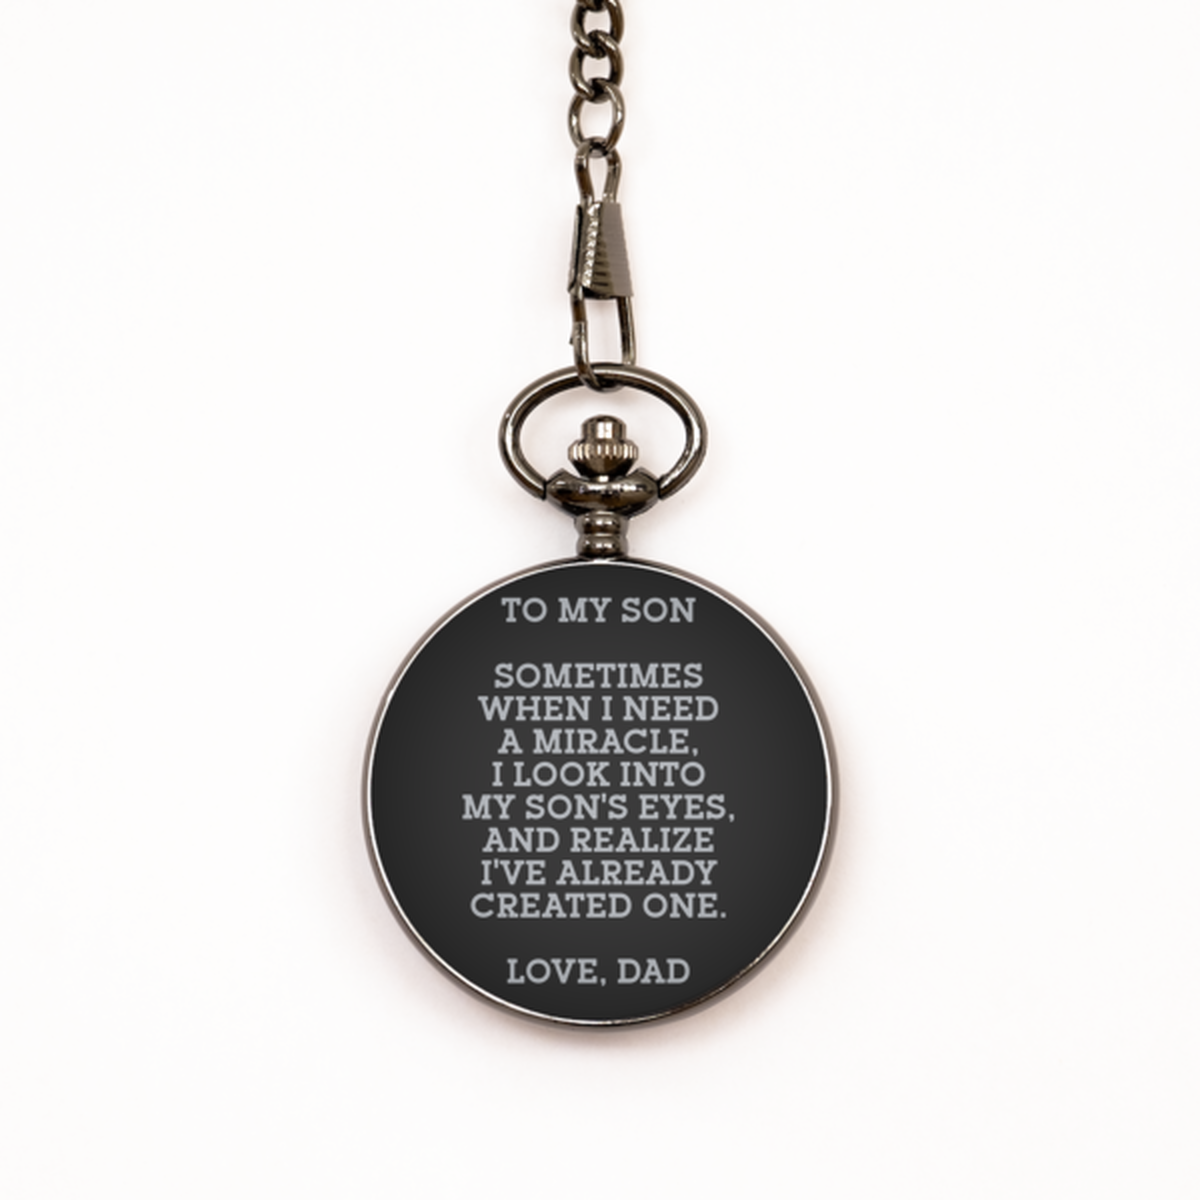 To My Son Black Pocket Watch, Sometimes When I Need A Miracle, Graduation Day Gifts For Son From Dad, Birthday Gifts For Men